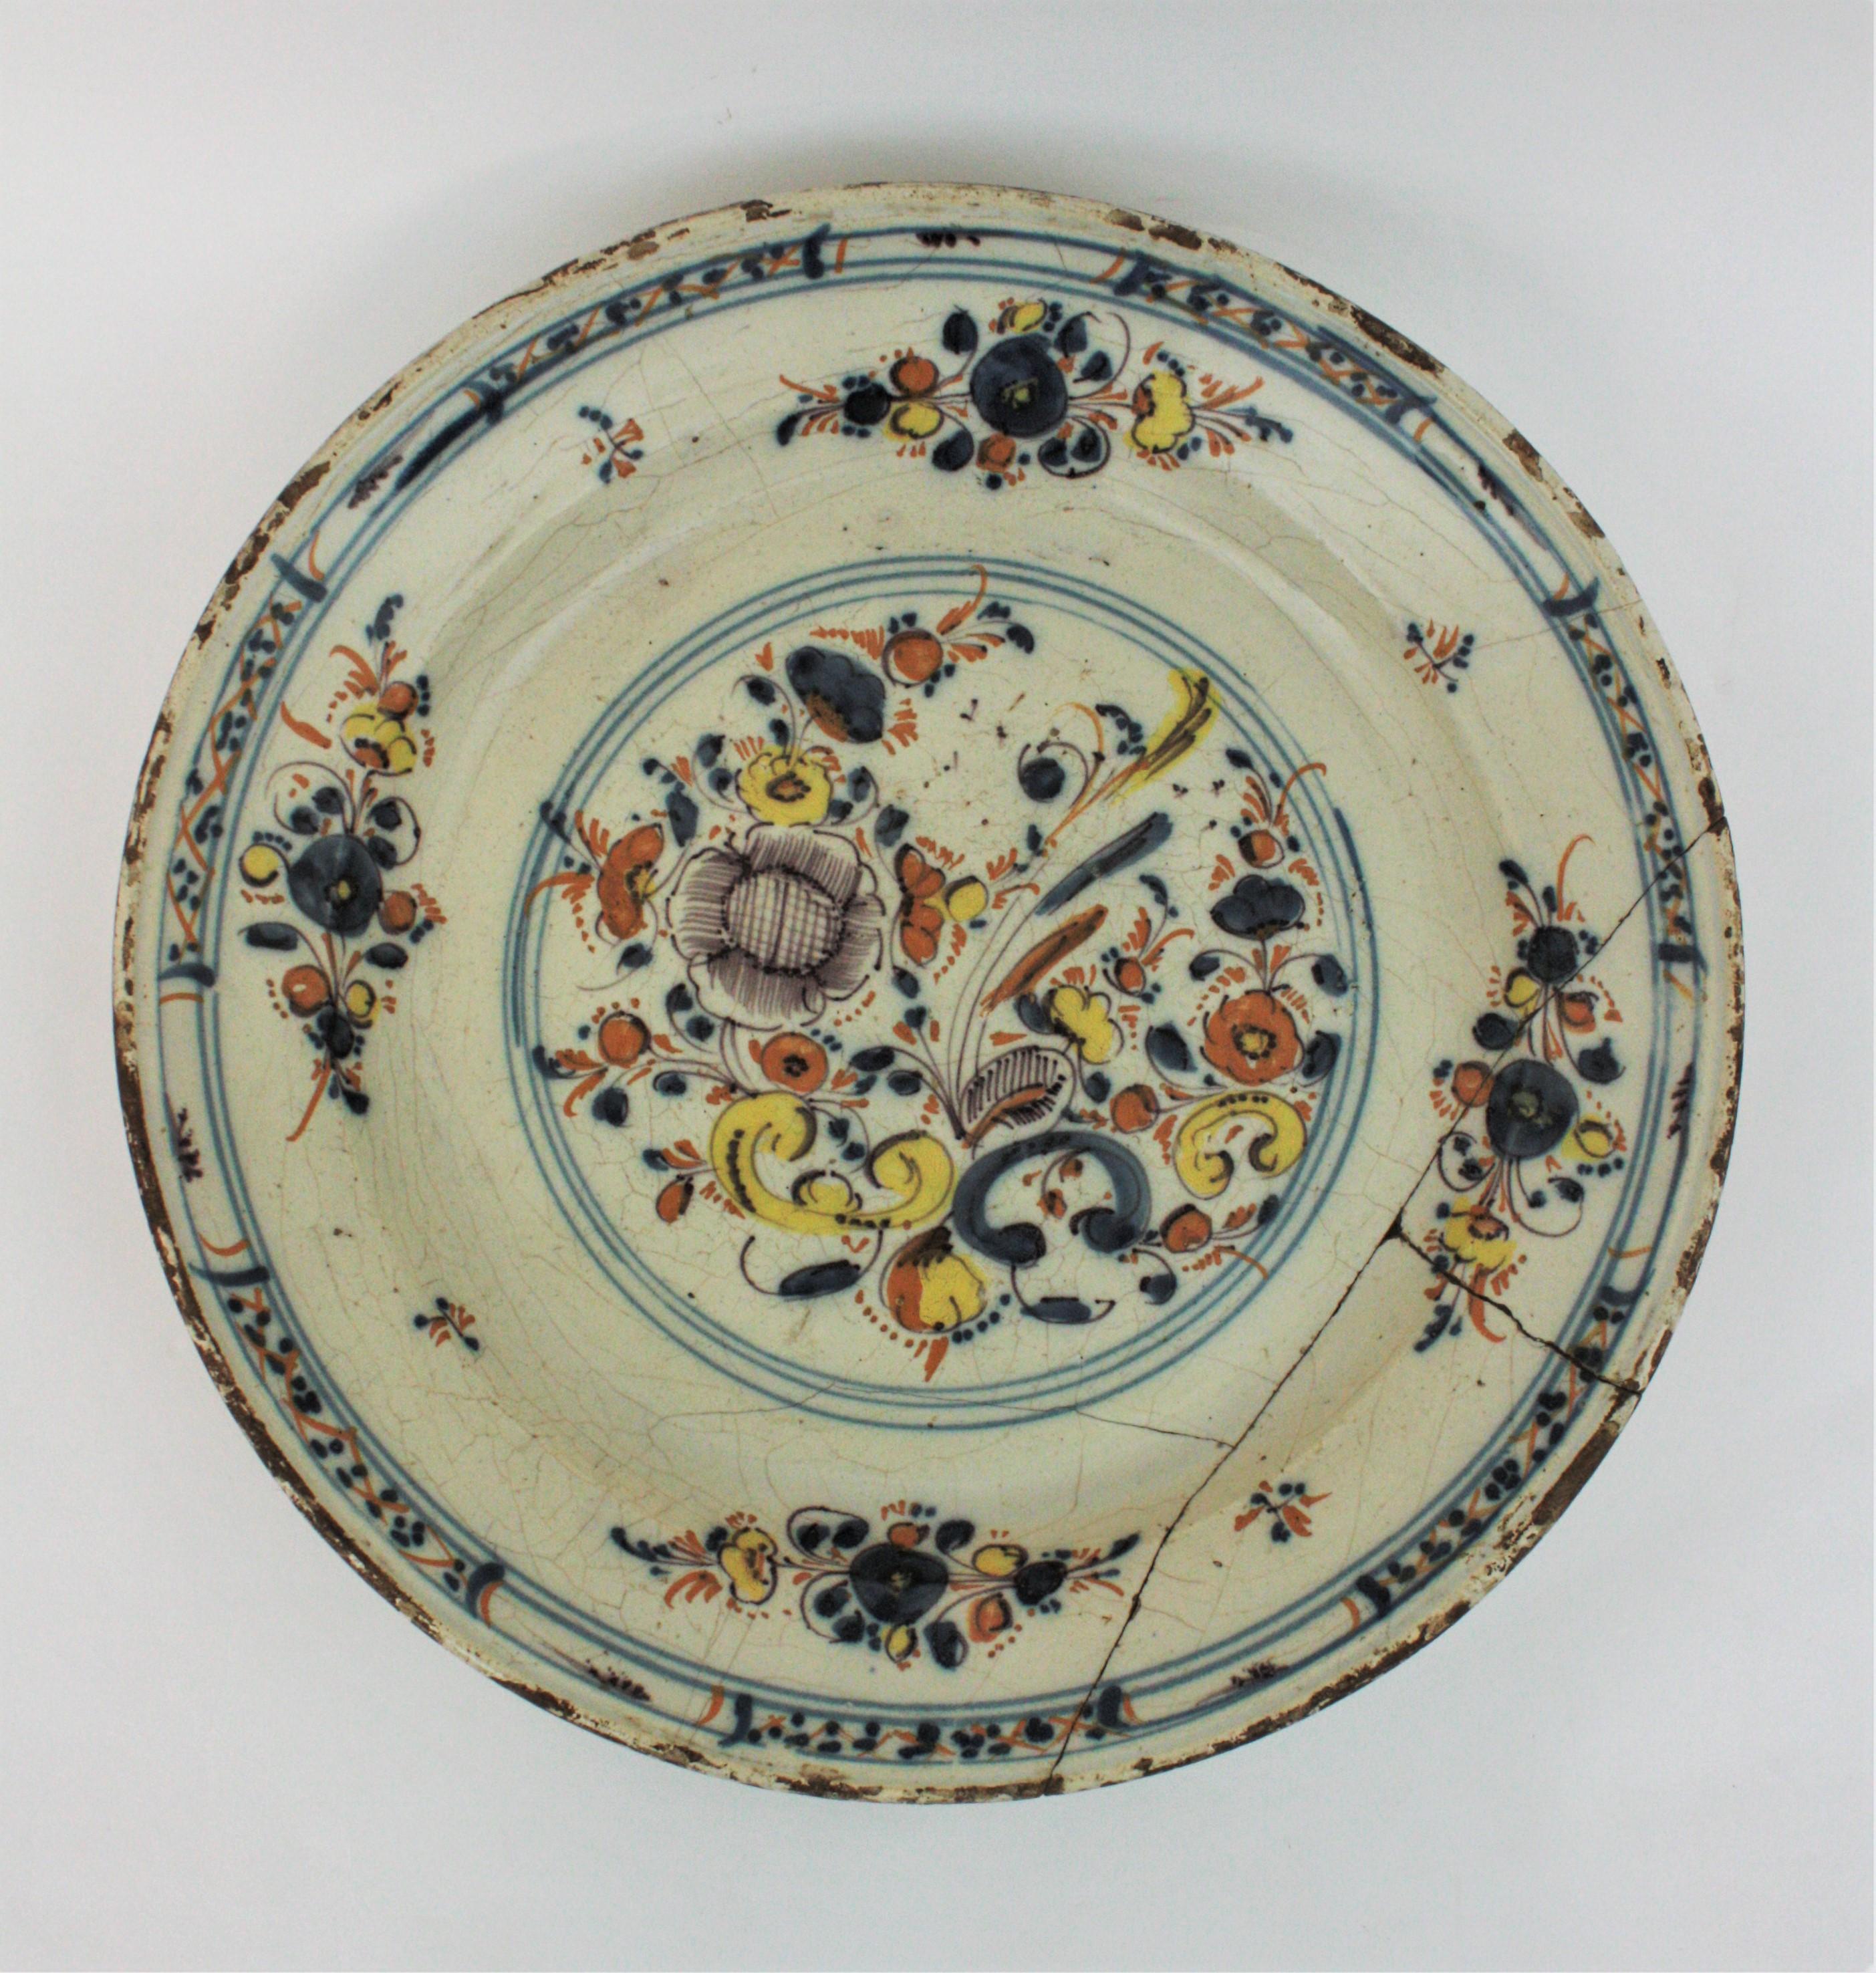 Spanish Faience charger with floral motifs. Talavera de la Reina-Puente del Arzobispo, Toledo. Spain, late 17th century.
Hand painted in ochre, yellow, brown and blue with a central roundel with a floral bouquet. Four smaller bouquets with stylised